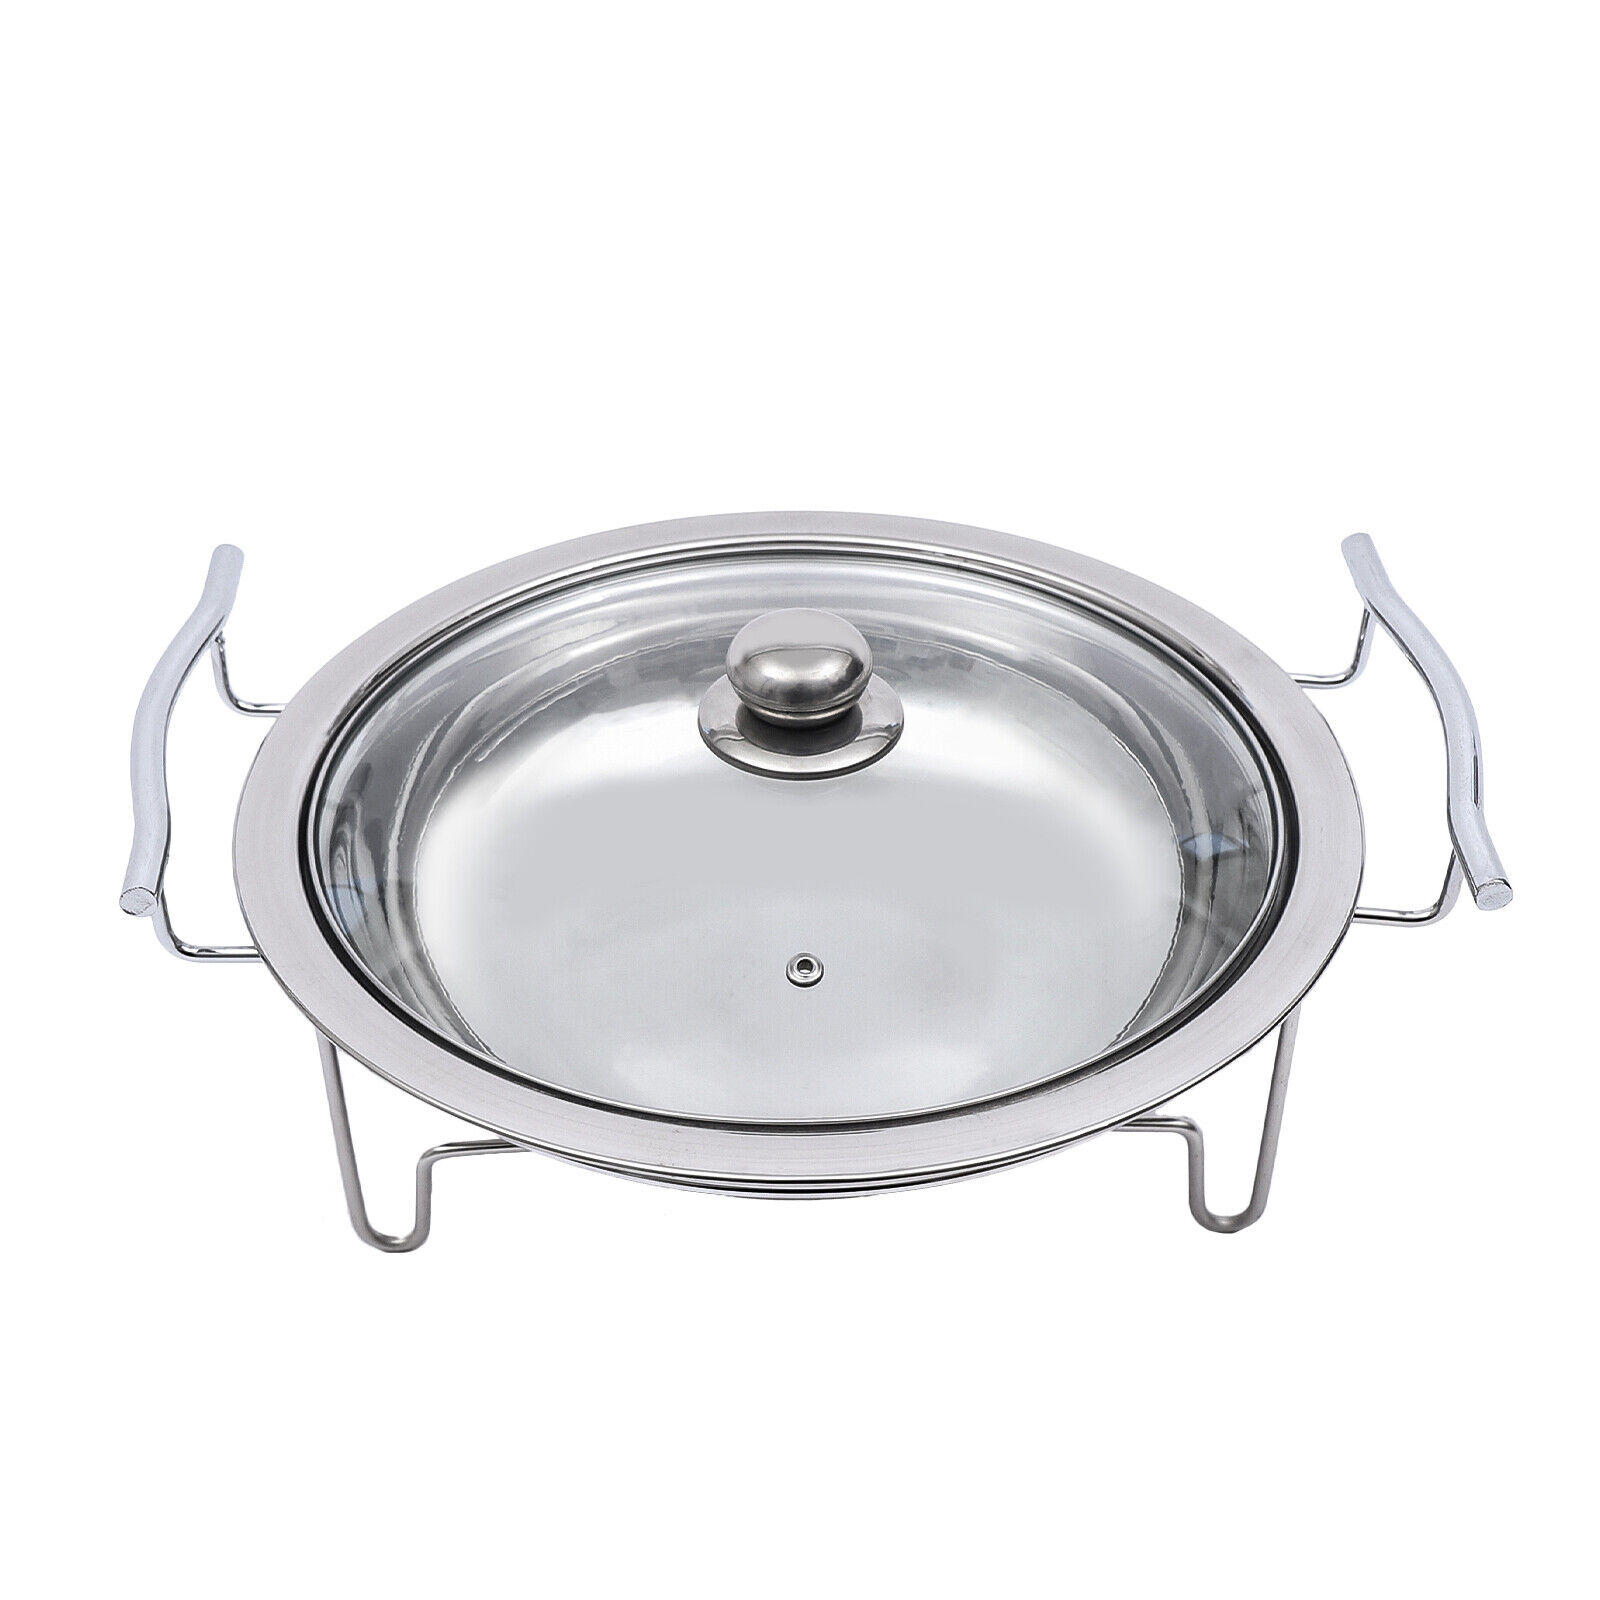 Great Choice Products 11" Catering Round Chaffing Dish Stainless Steel Home Buffet Chafer Dish Warmers